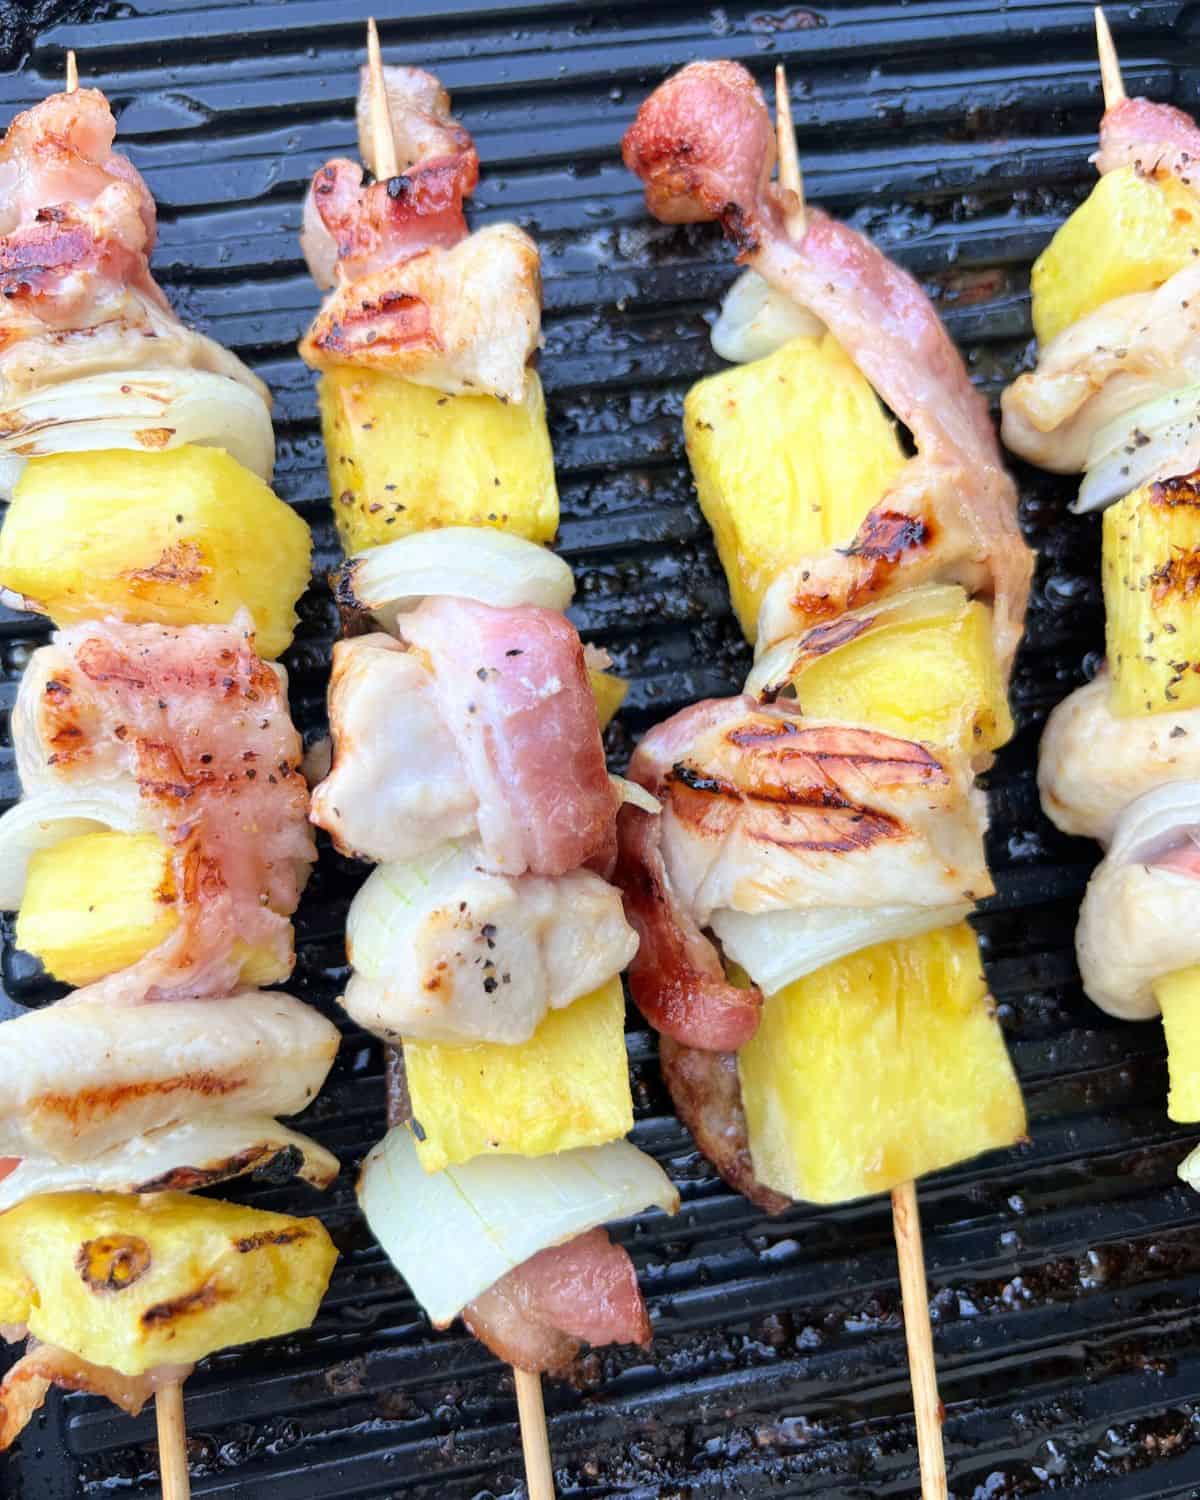 Grilled bacon, pineapple, and chicken skewers ready for serving. 